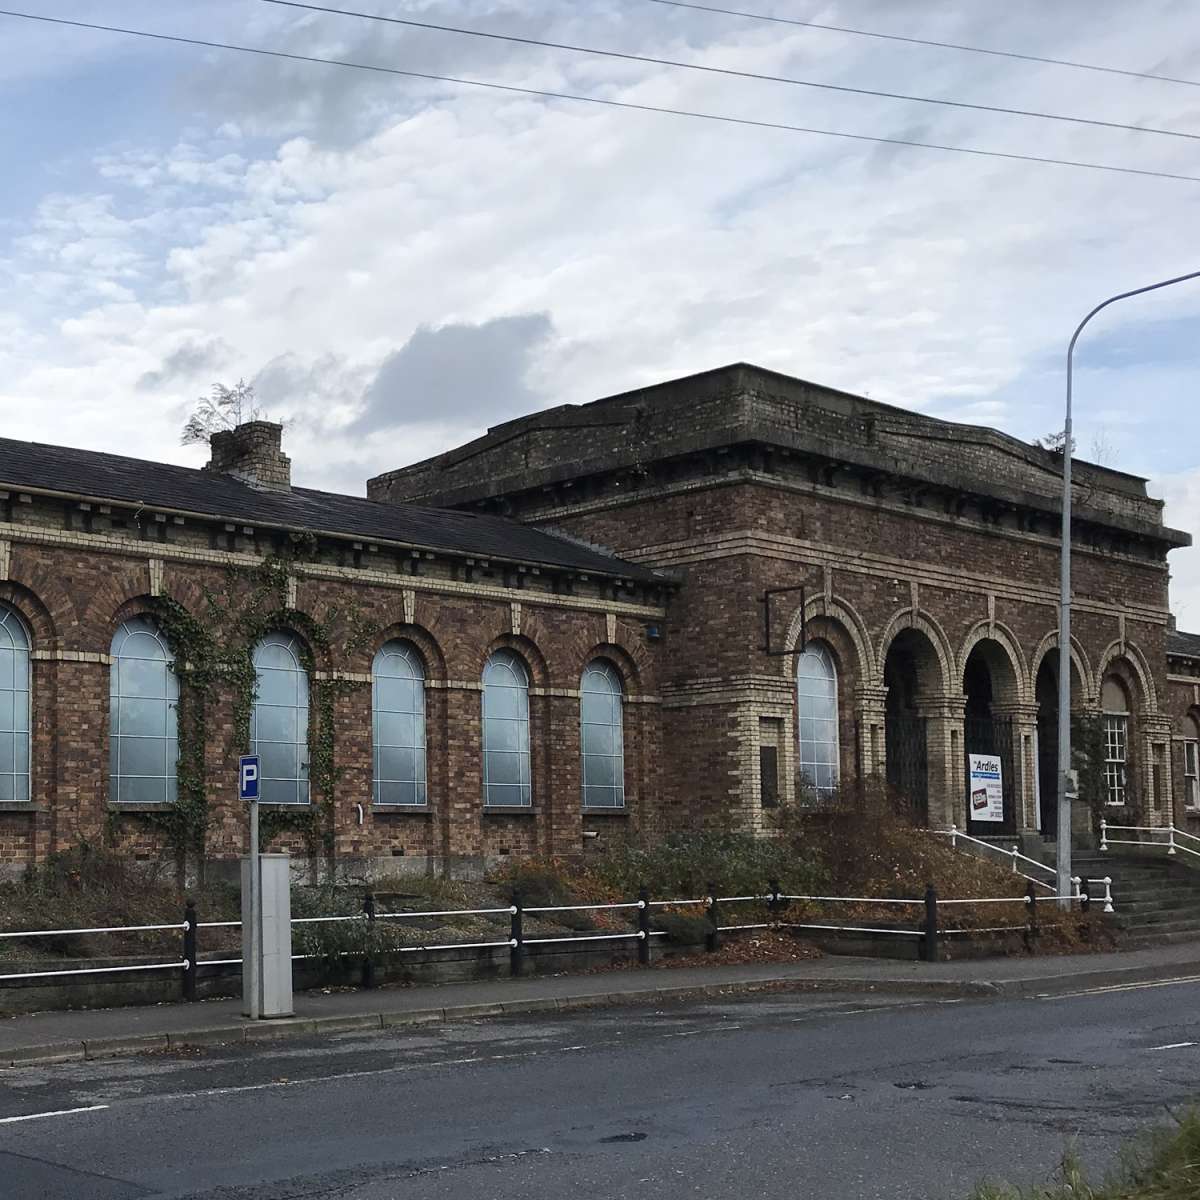 Craftstudio acquire the Old Monaghan Train Station